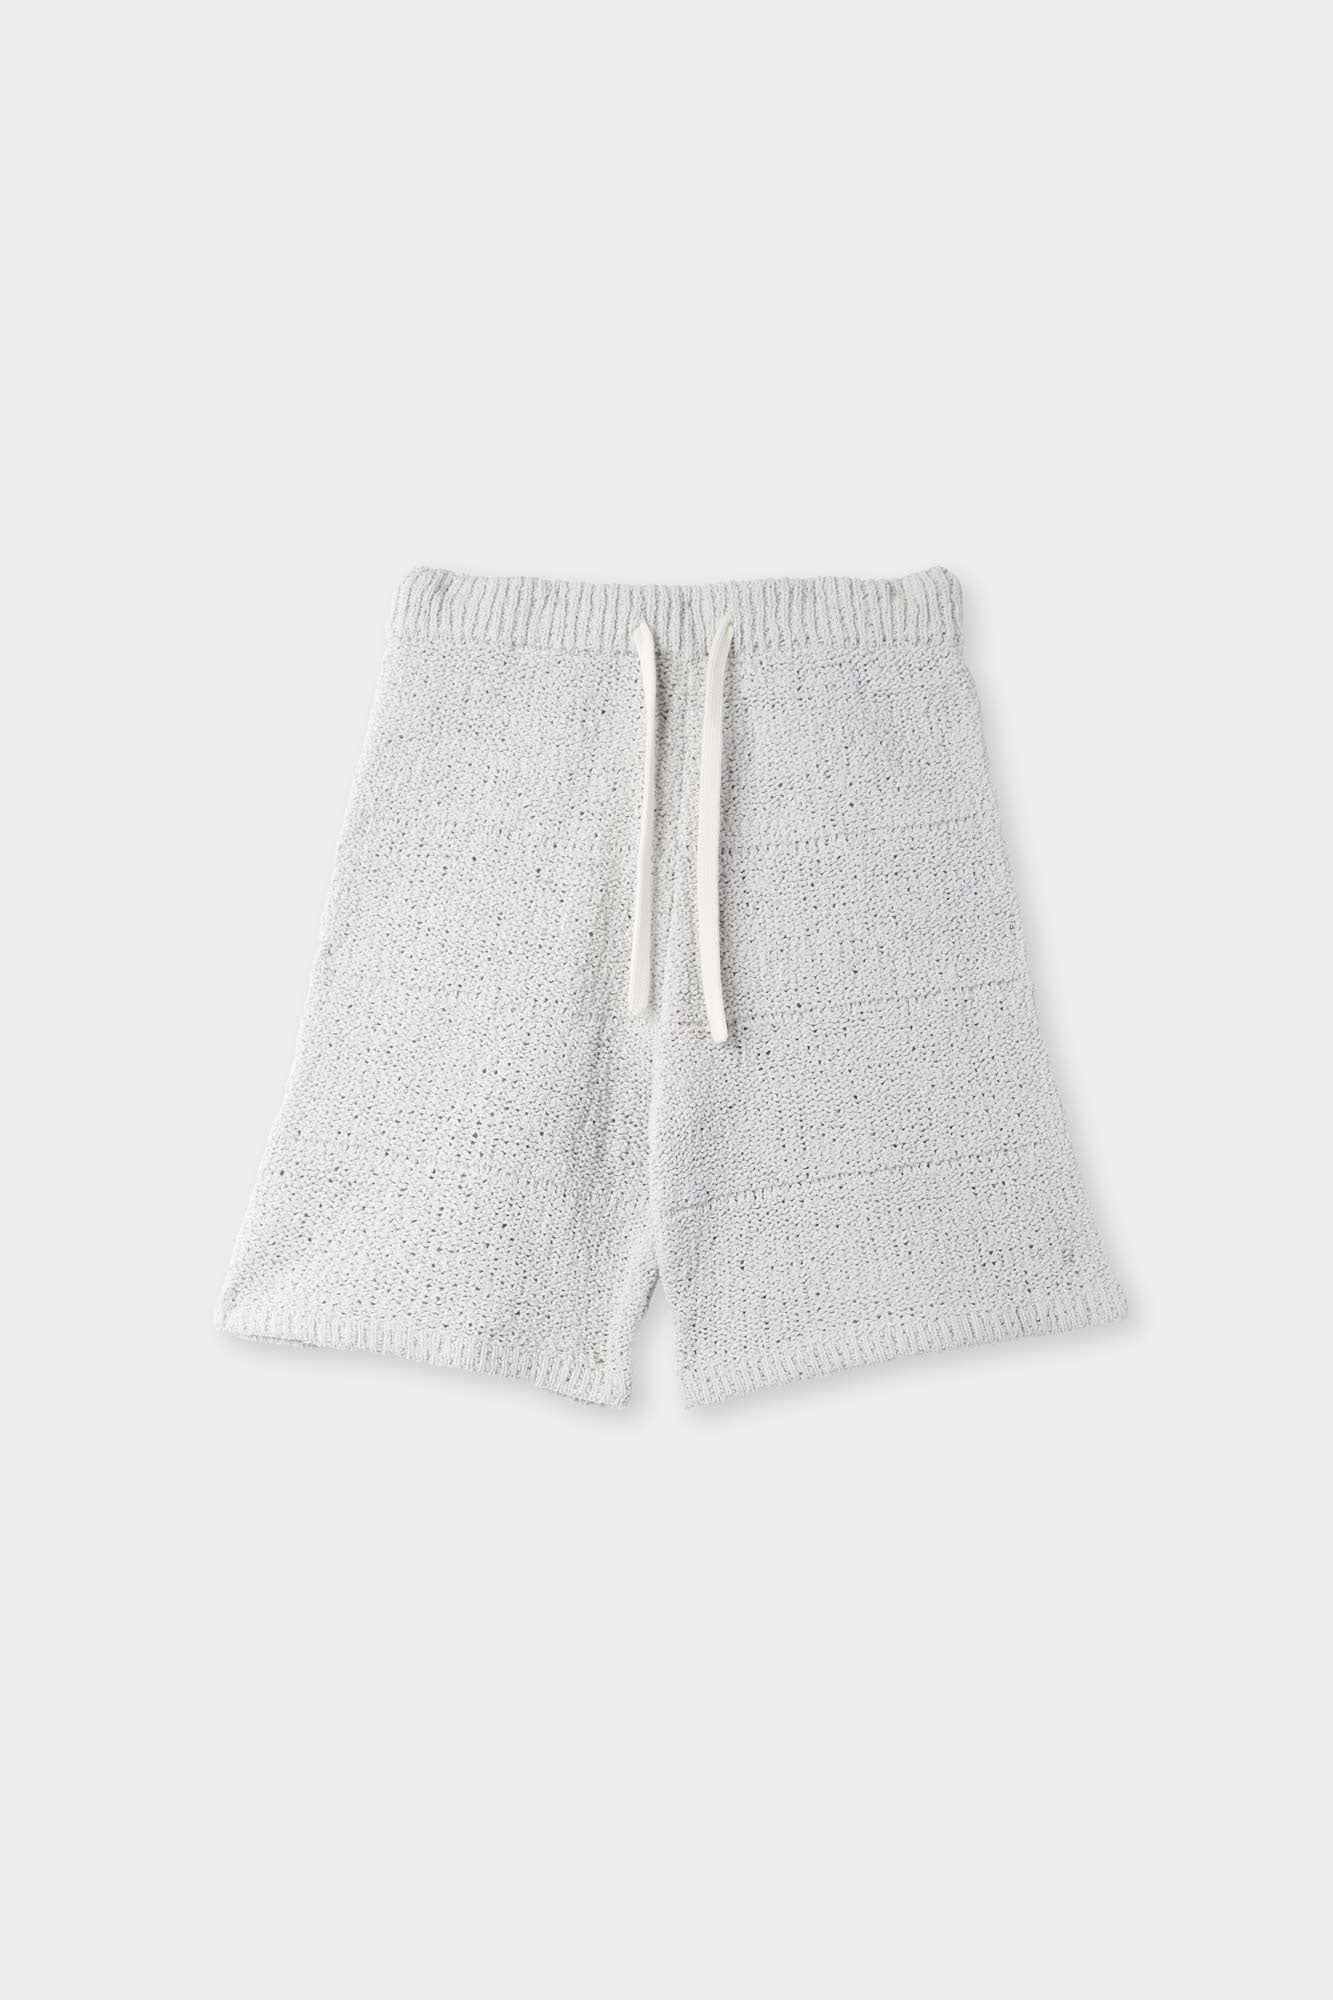 KNITTED SHORTS / grey